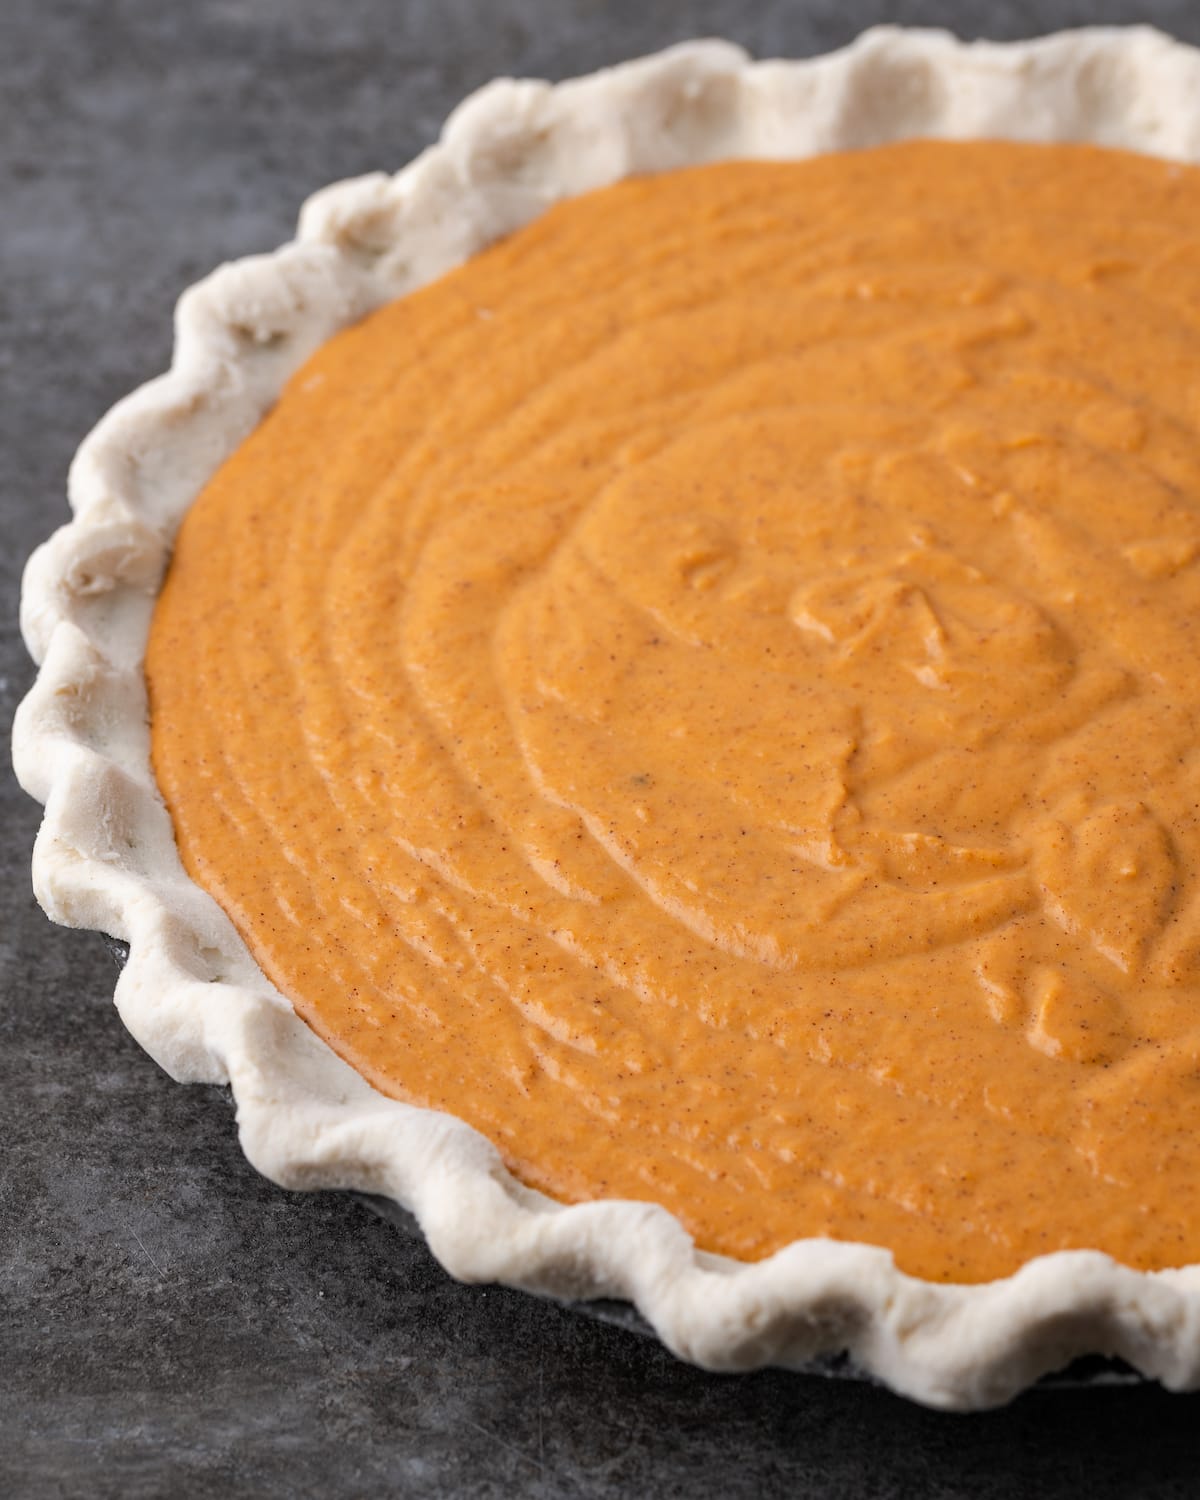 An unbaked pie crust filled with pumpkin pie filling.